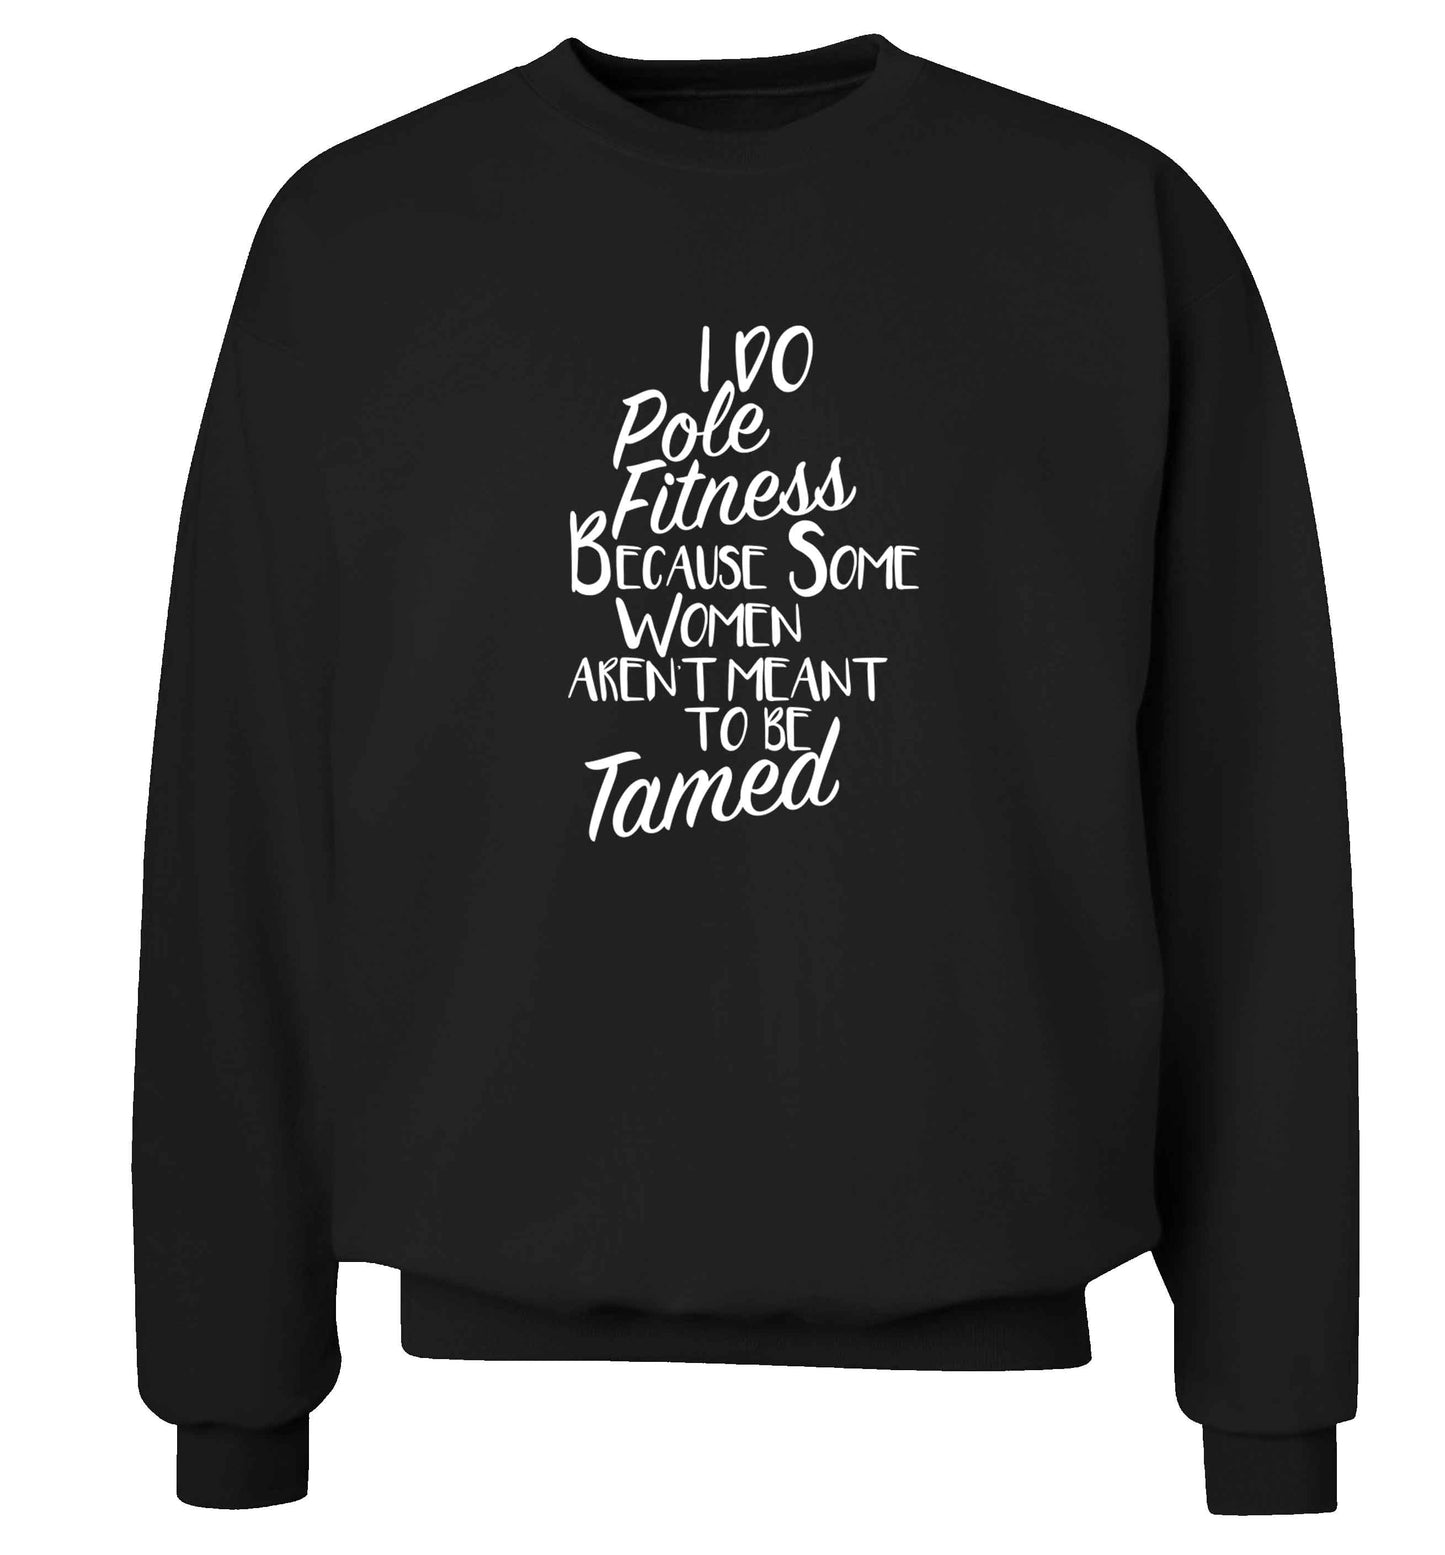 I do pole fitness because some women aren't meant to be tamed adult's unisex black sweater 2XL